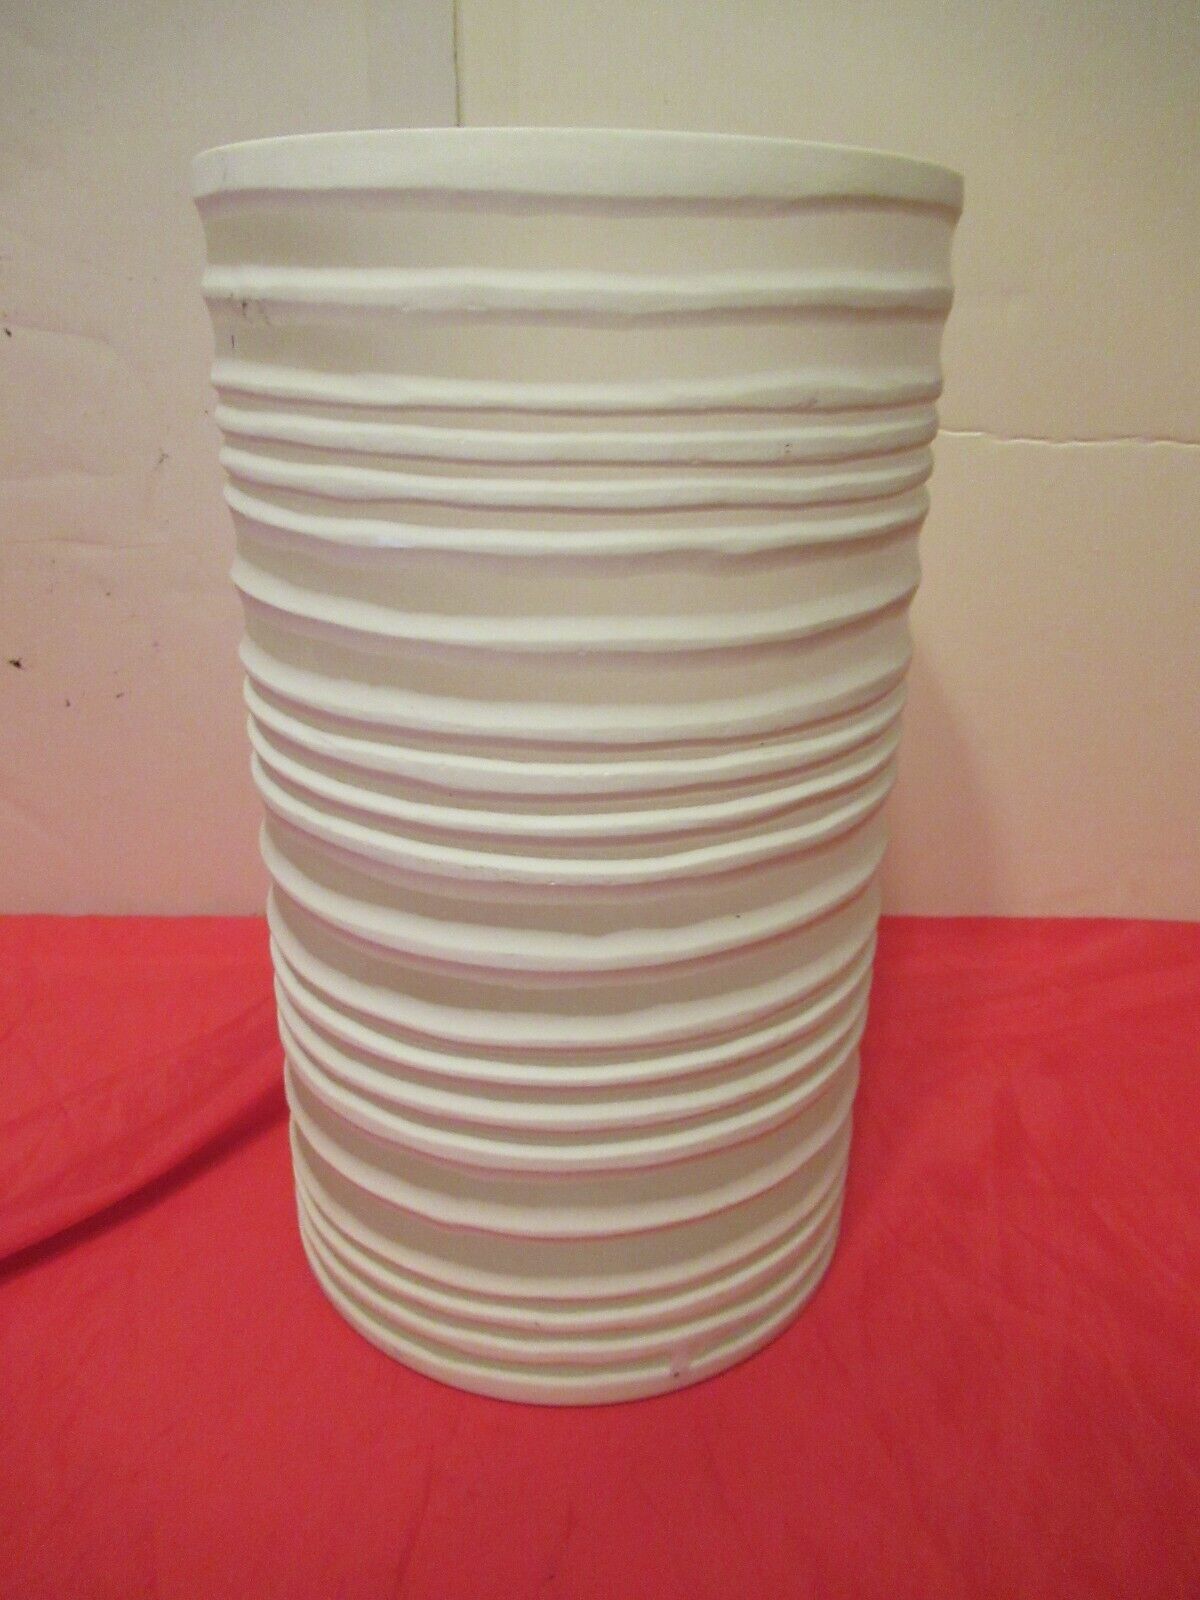 Unique 12 inch Tall 7 Inch wide Glass Vase with ringed Clay around it